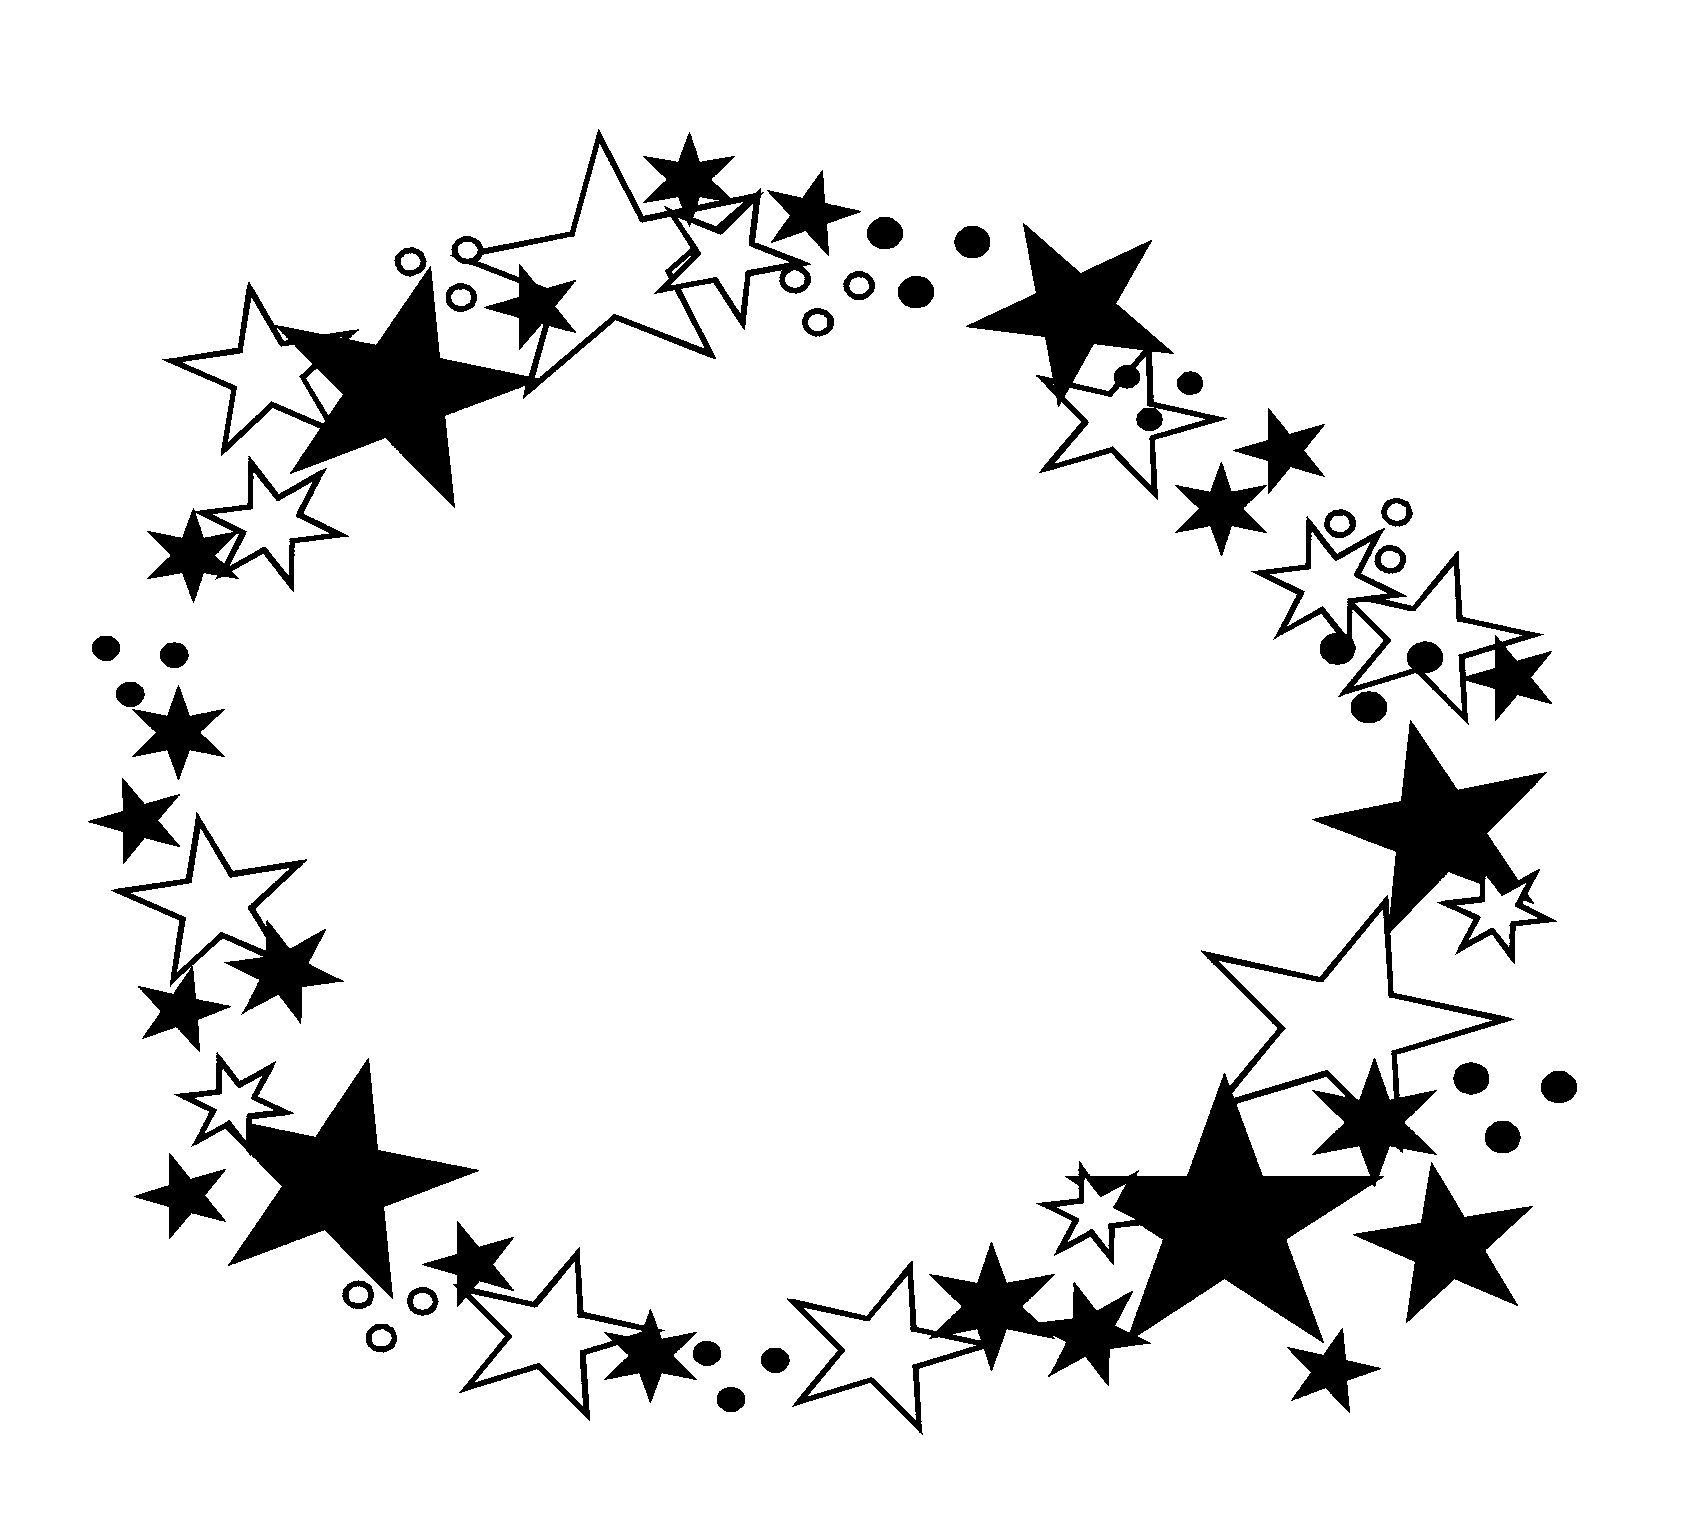 Free Star Line Art, Download Free Star Line Art png images, Free ...